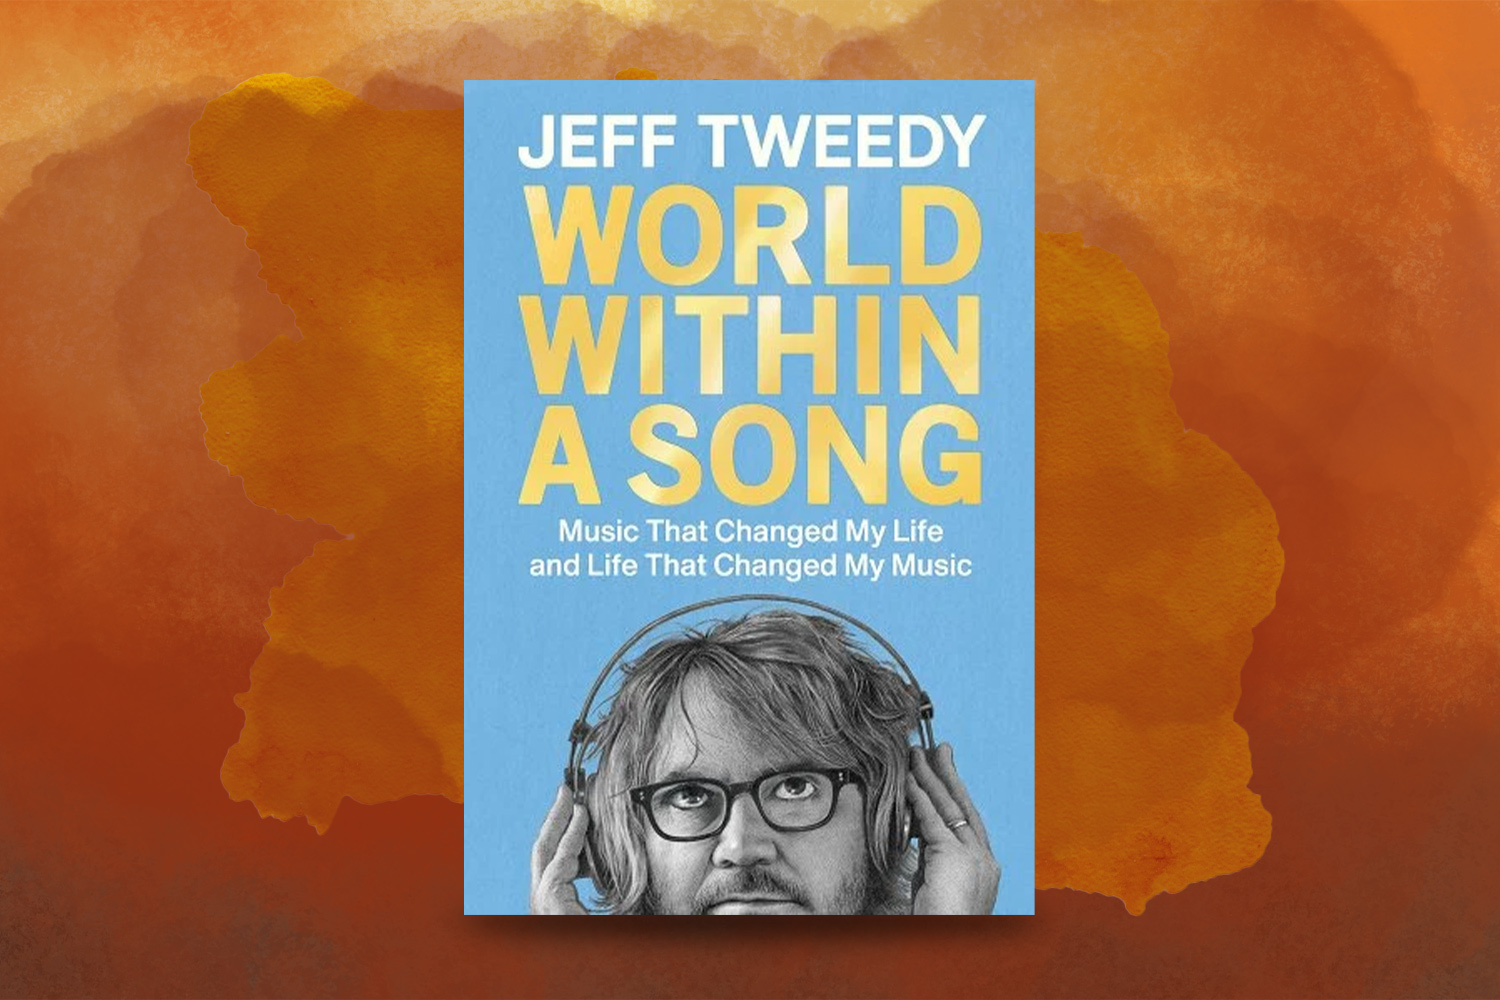 Jeff Tweedy, World Within a Song